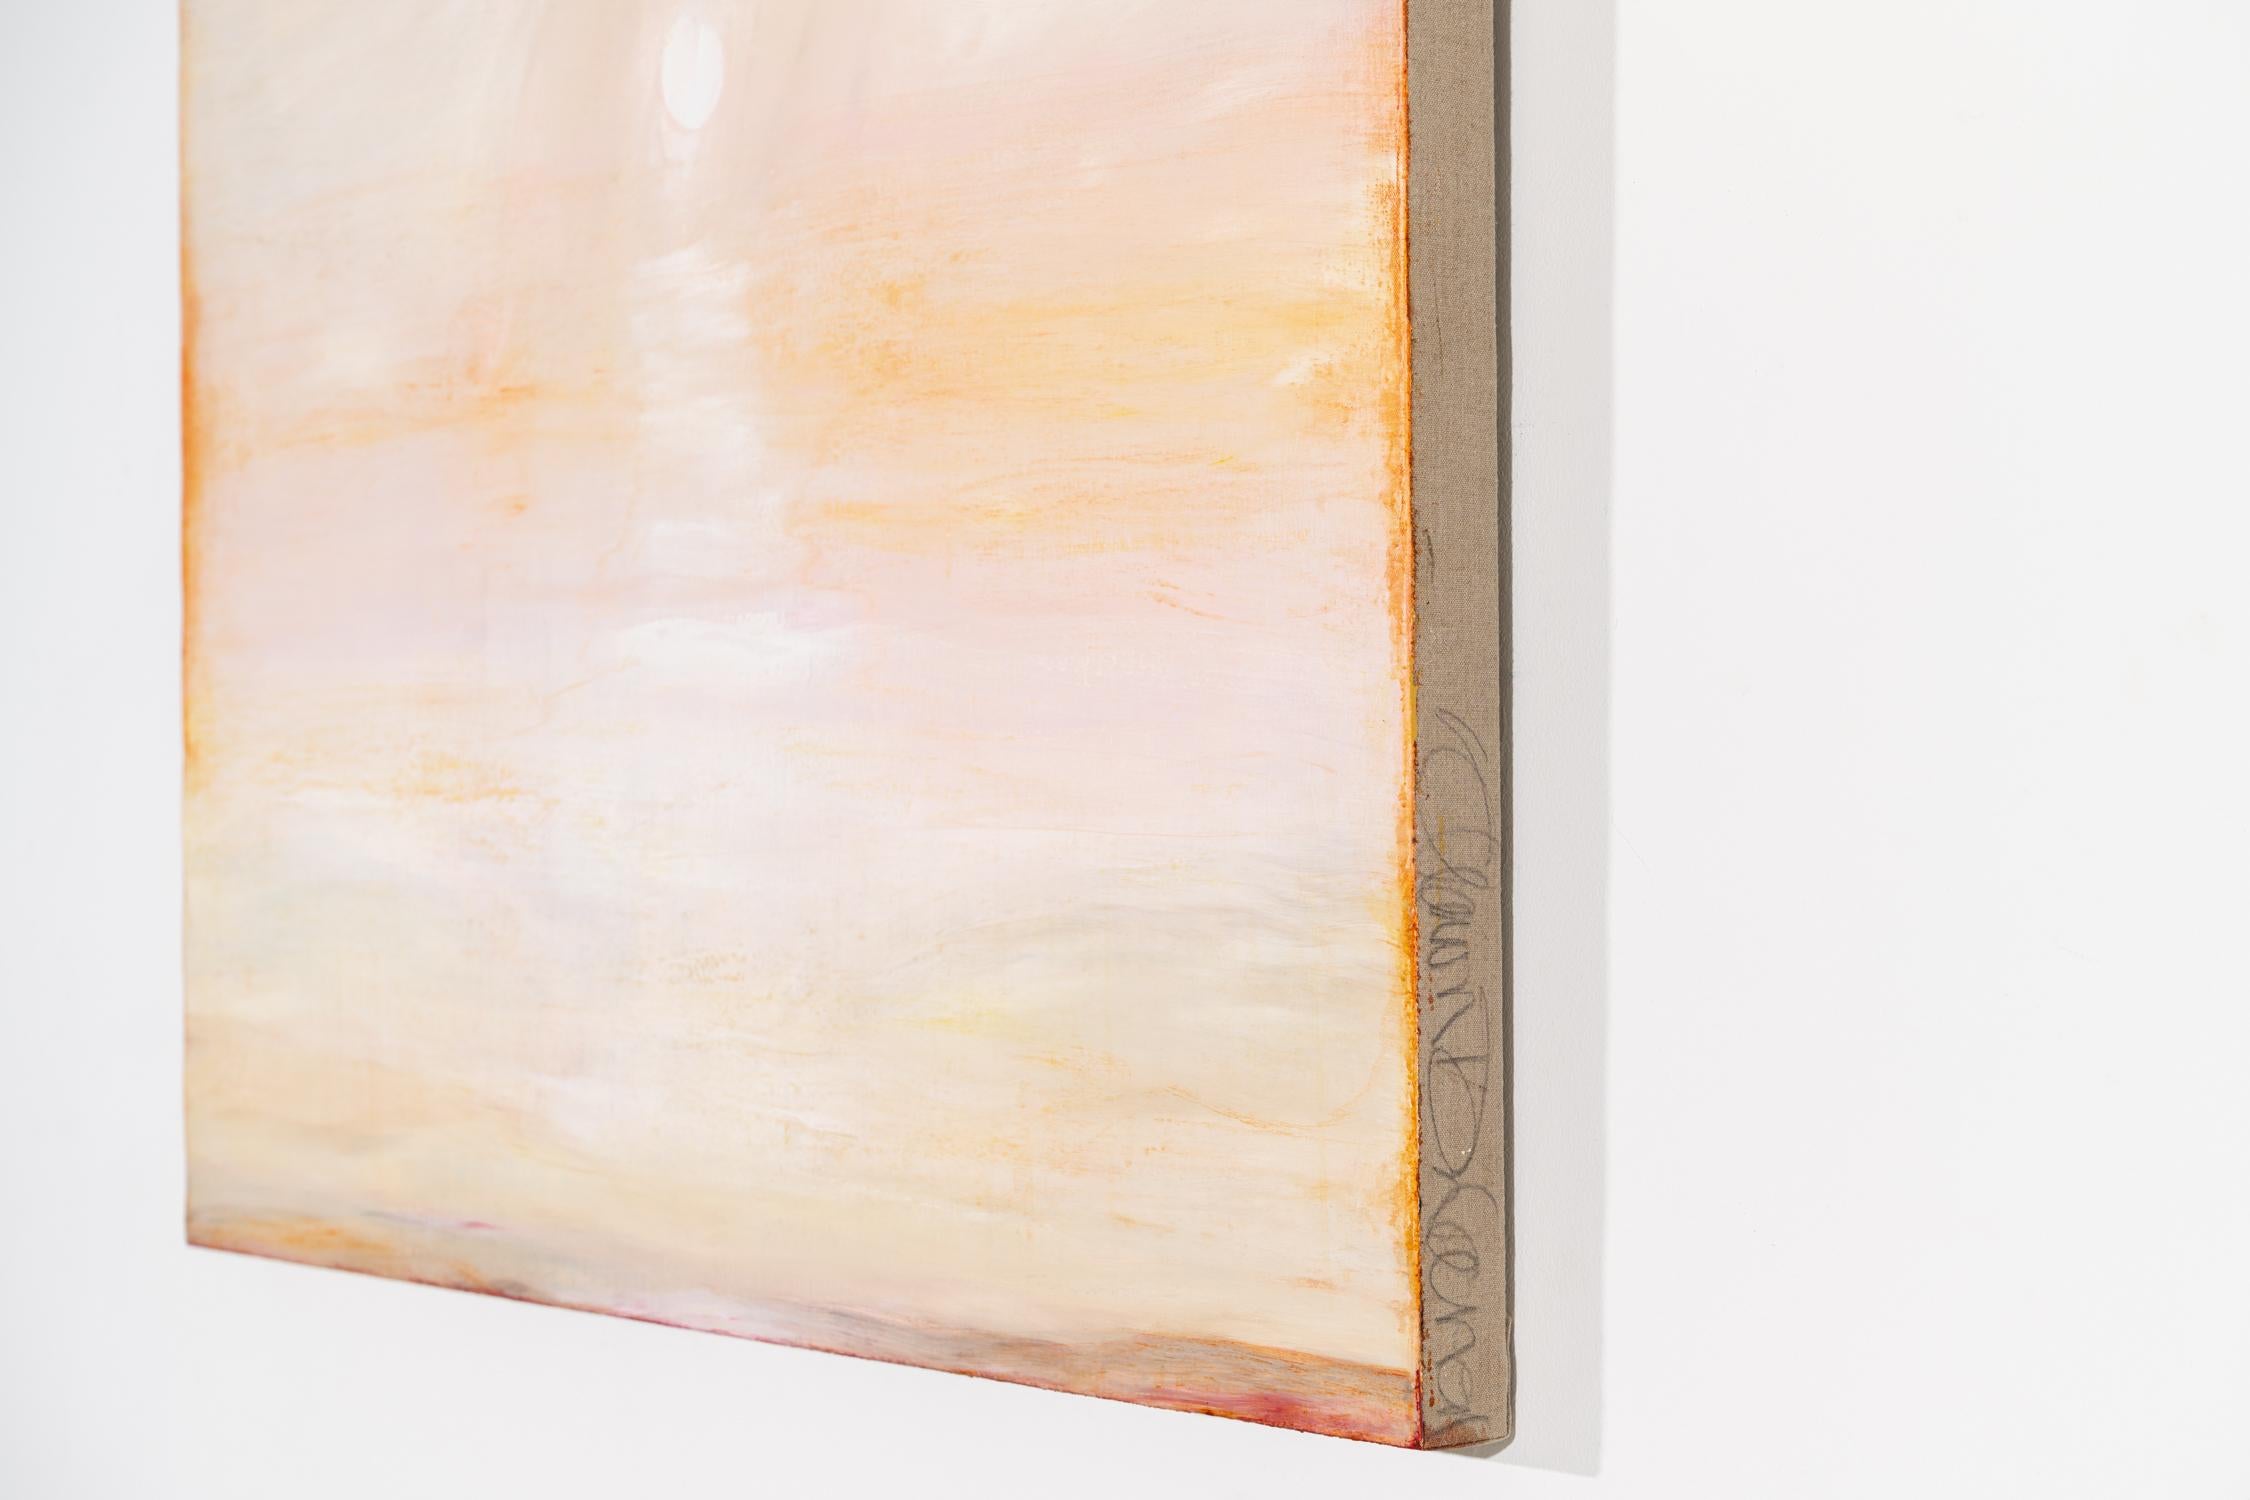 Abstract color field landscape painting in pale peach with accents of pastel pink, orange, and beige
